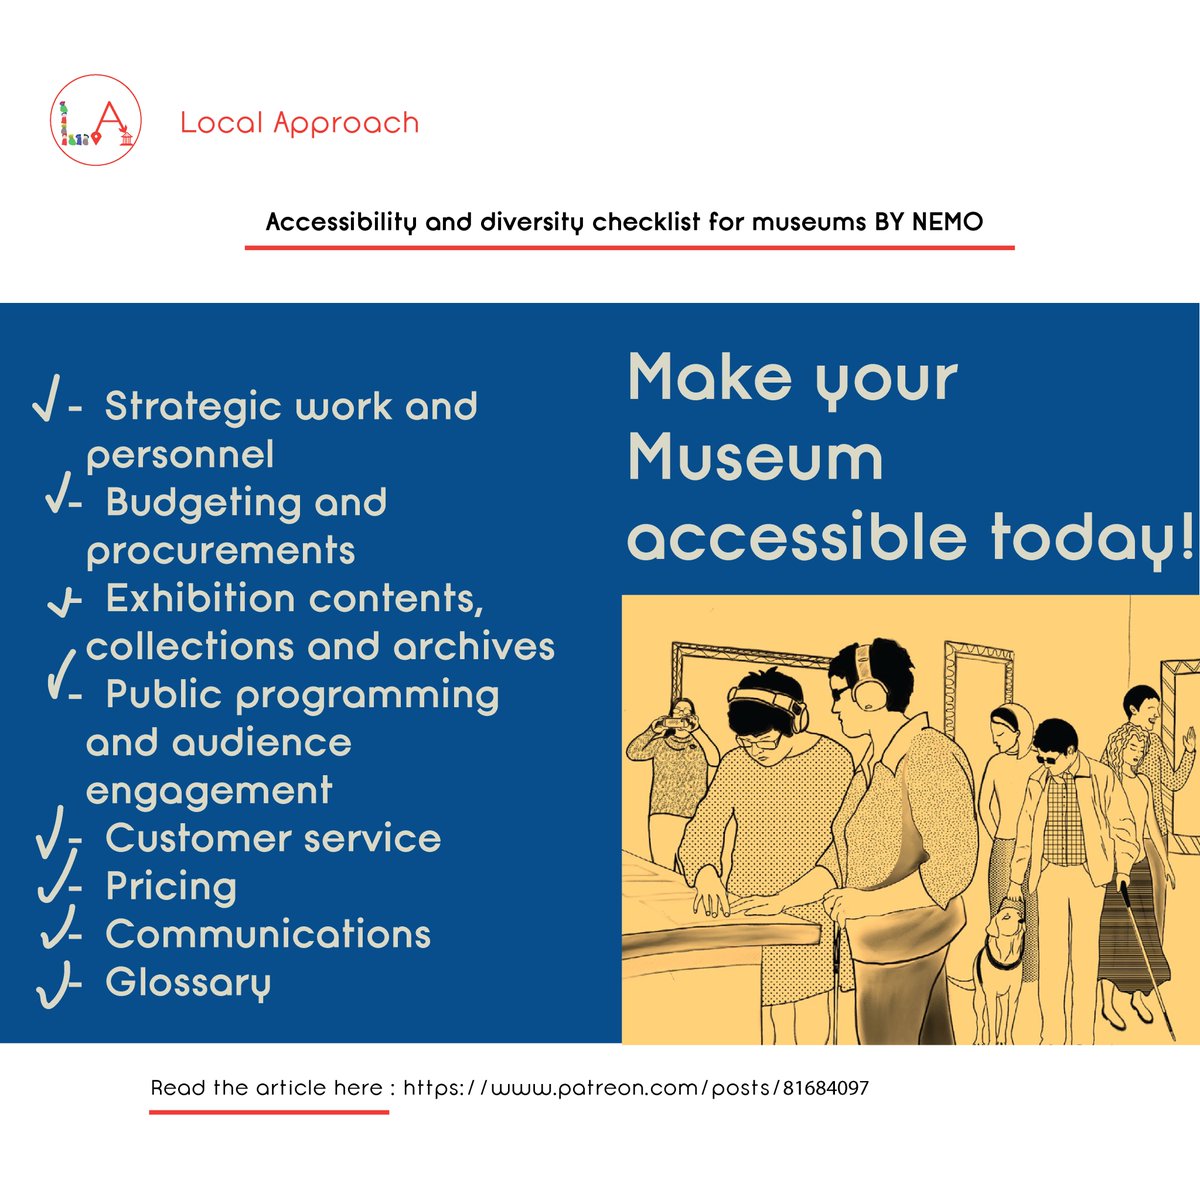 #Accessibility and #diversity checklist for #museums #BYNEMO

patreon.com/posts/81684097

#NetworkofEuropeanMuseumOrganisations #culturalprofessionals #accessiblemuseum

@NEMOoffice 
@BMZ_Bund 
@KulttuuriaKaik